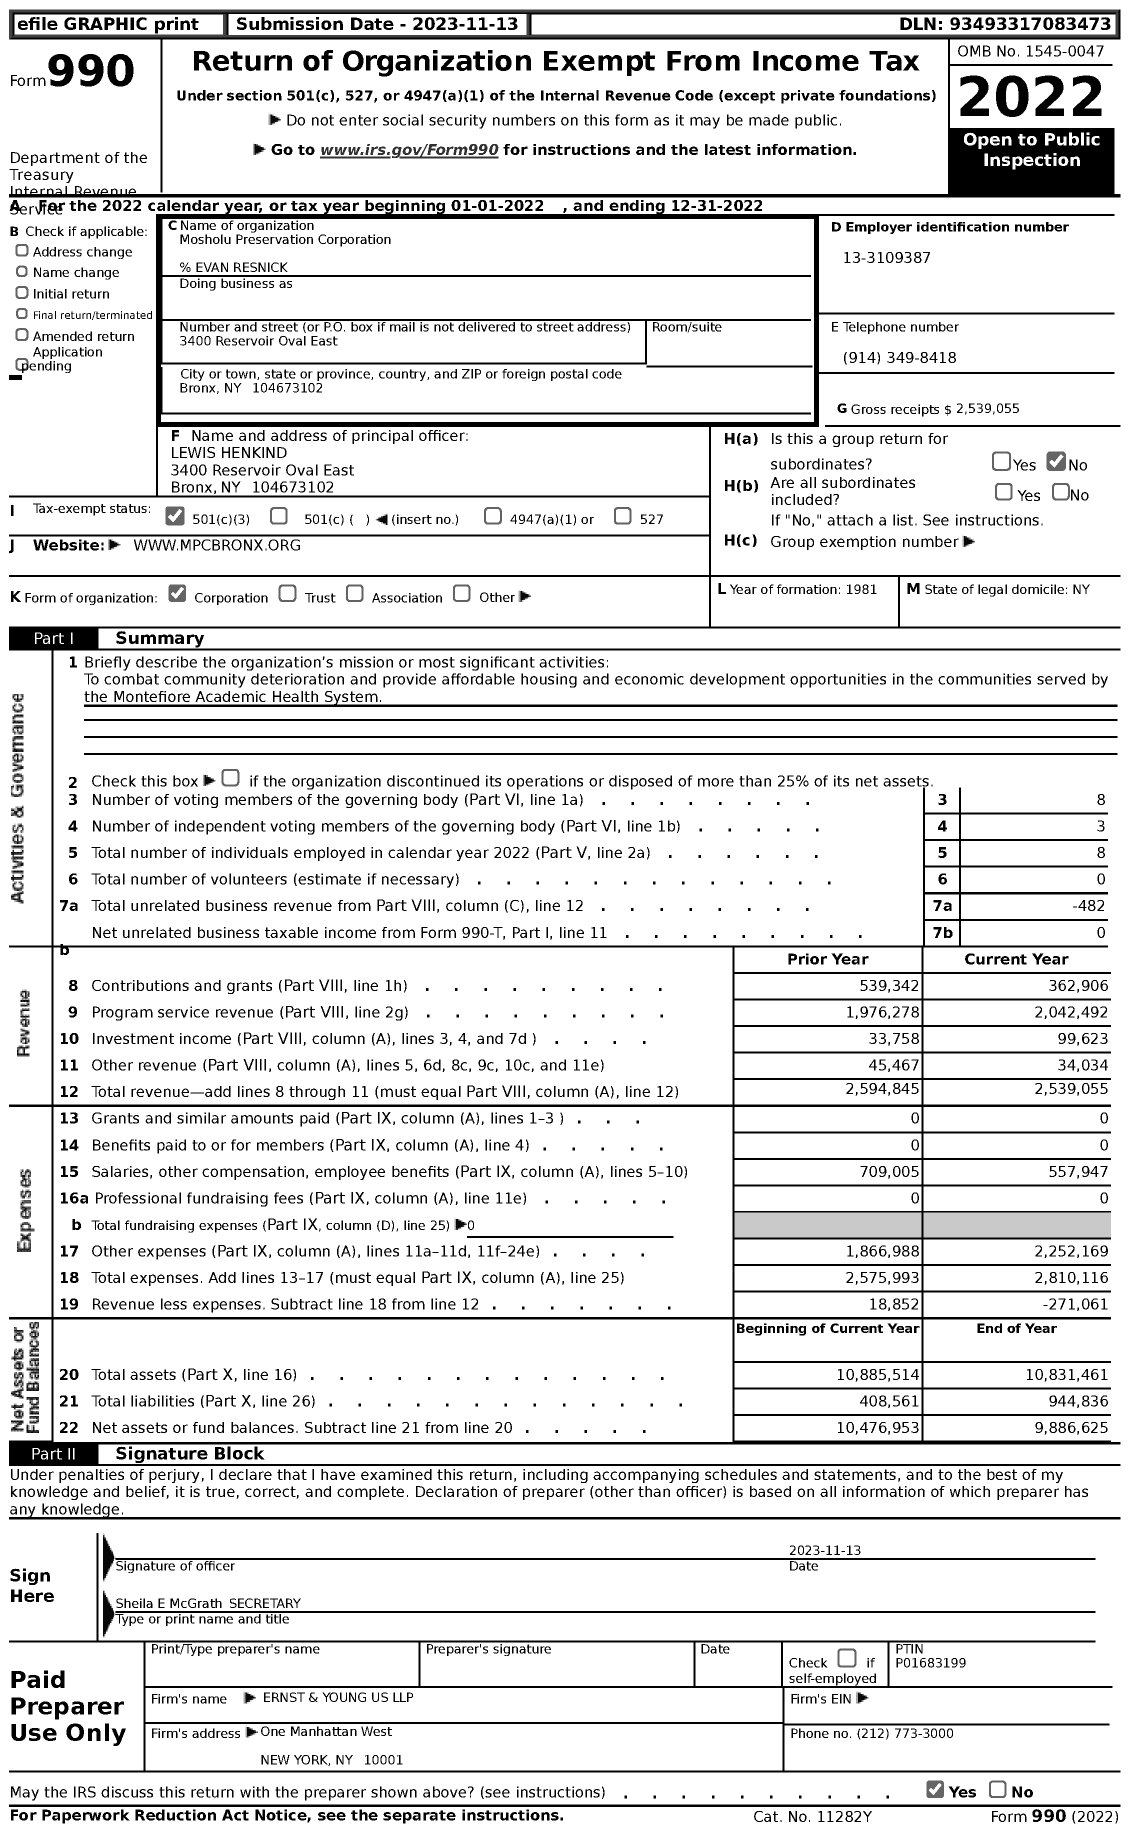 Image of first page of 2022 Form 990 for Mosholu Preservation Corporation (MPC)